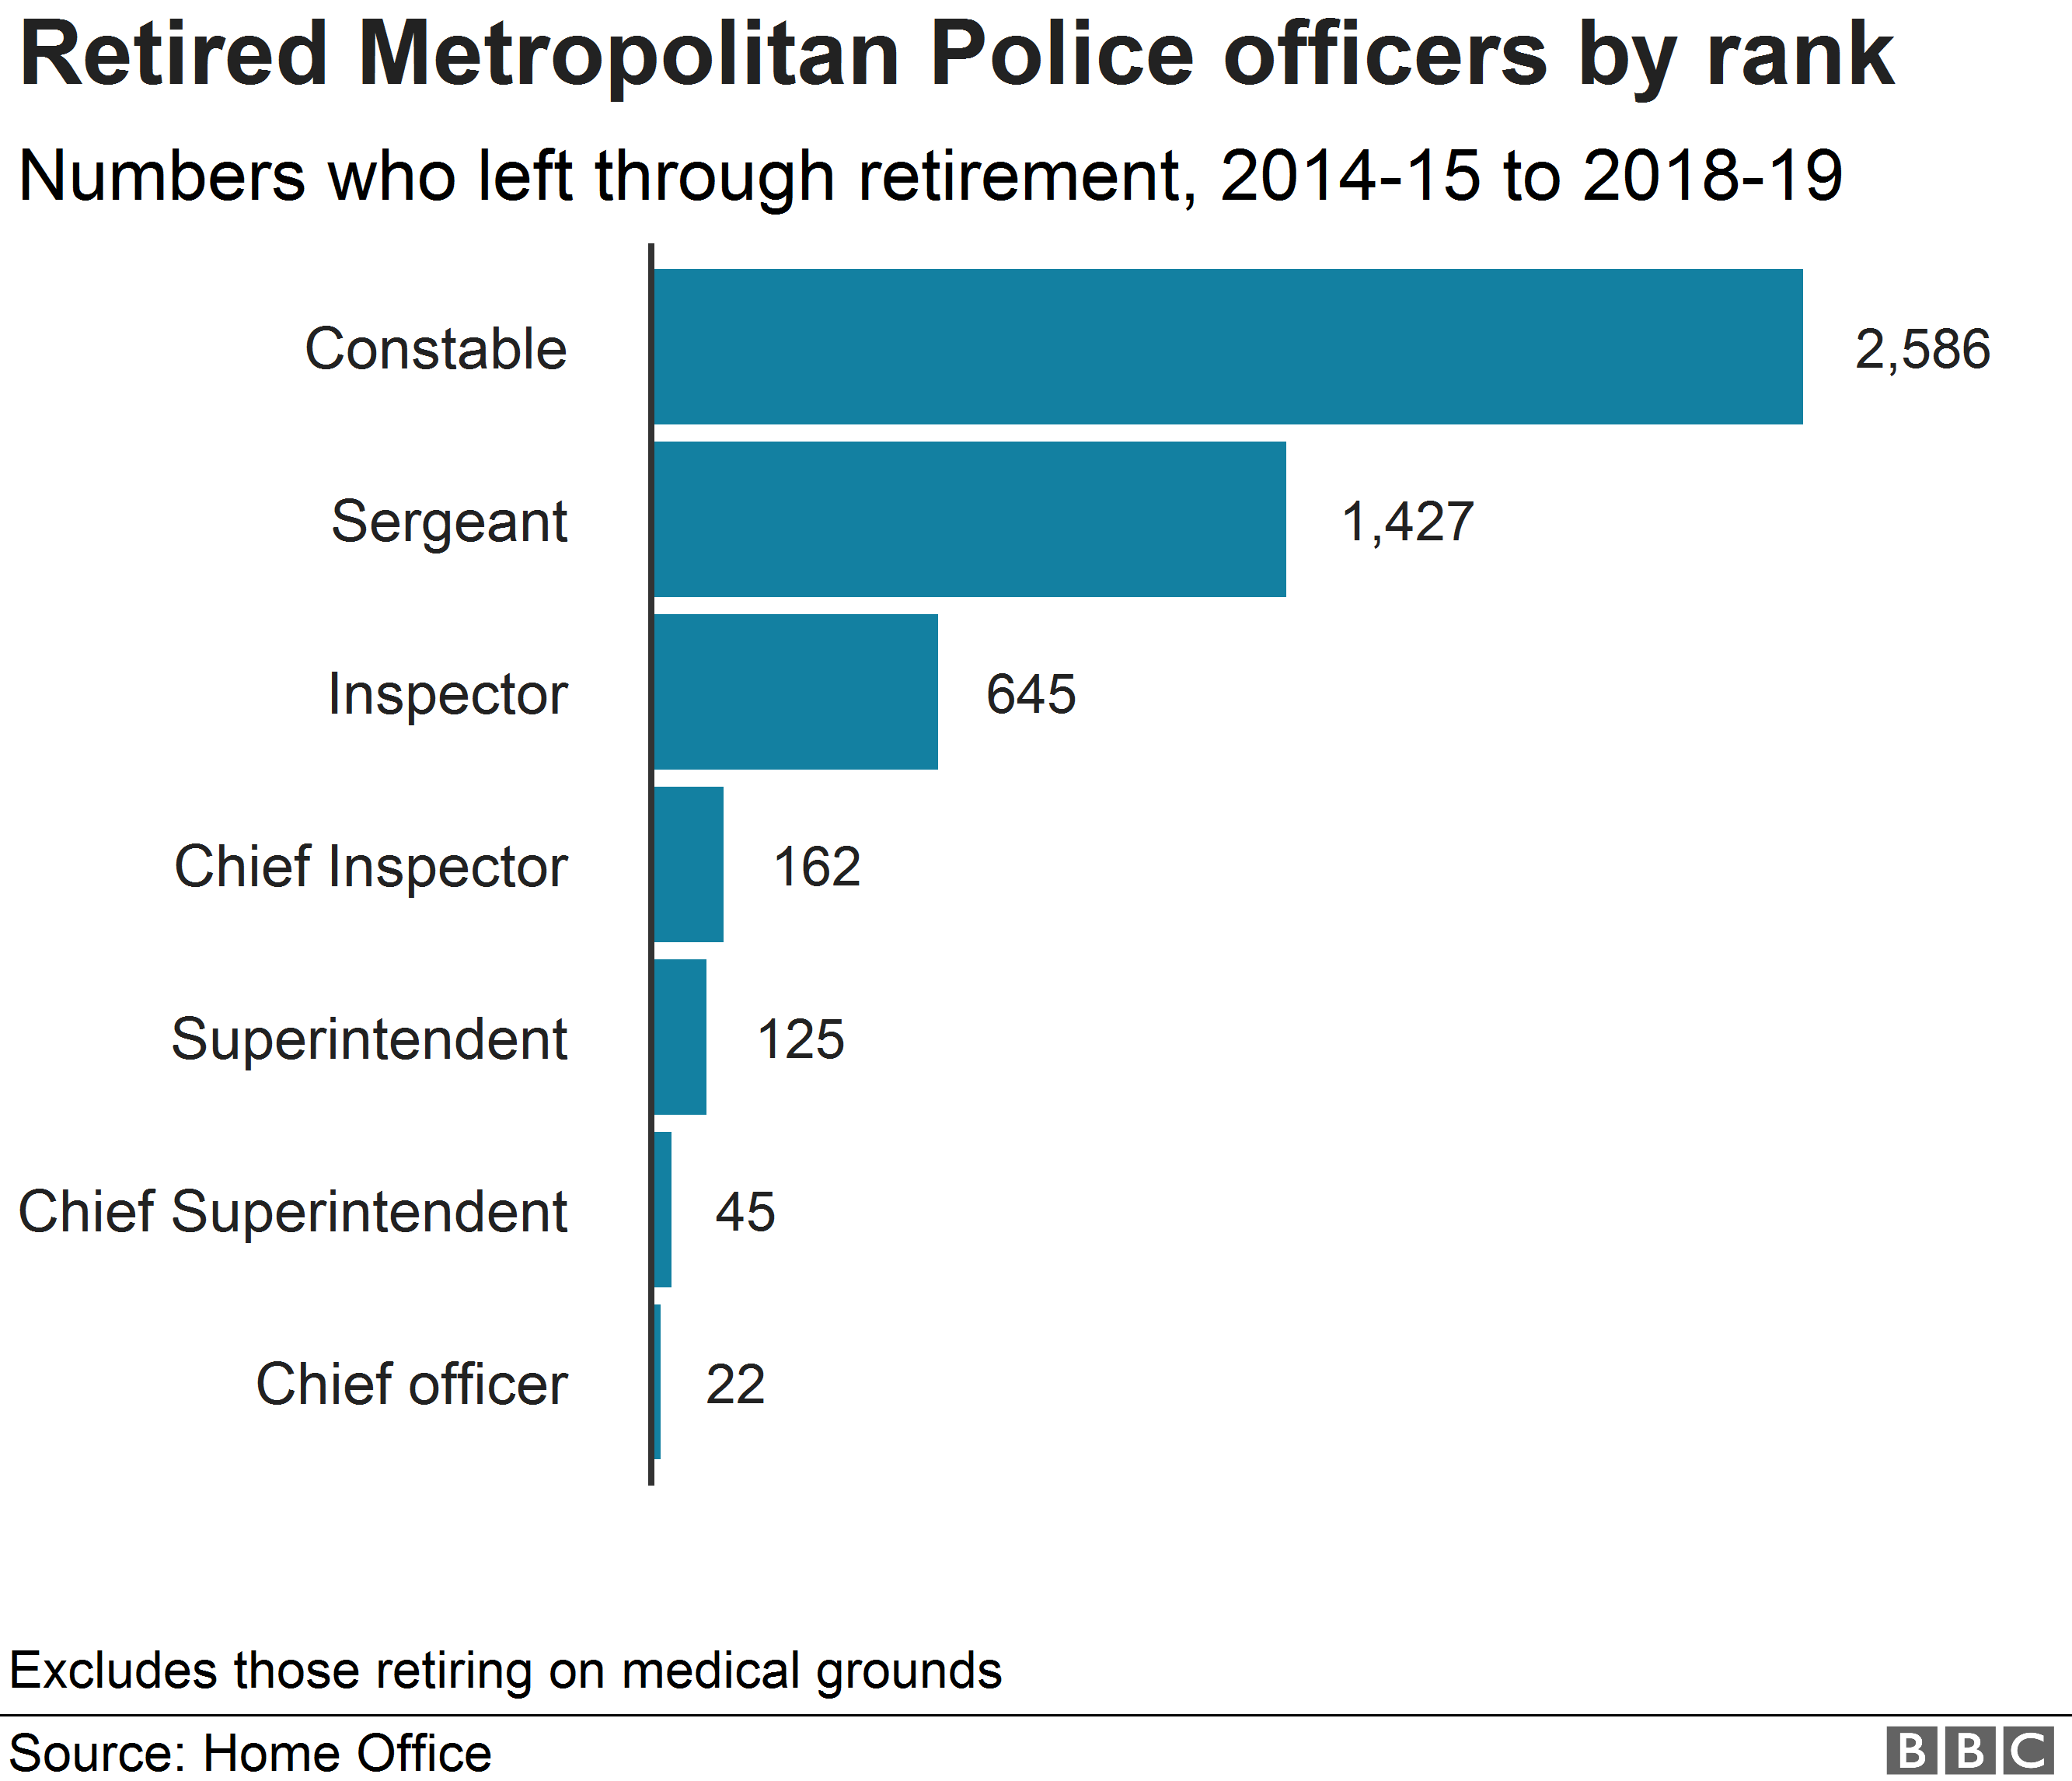 Chart showing numbers of retired police officers in the Met by rank